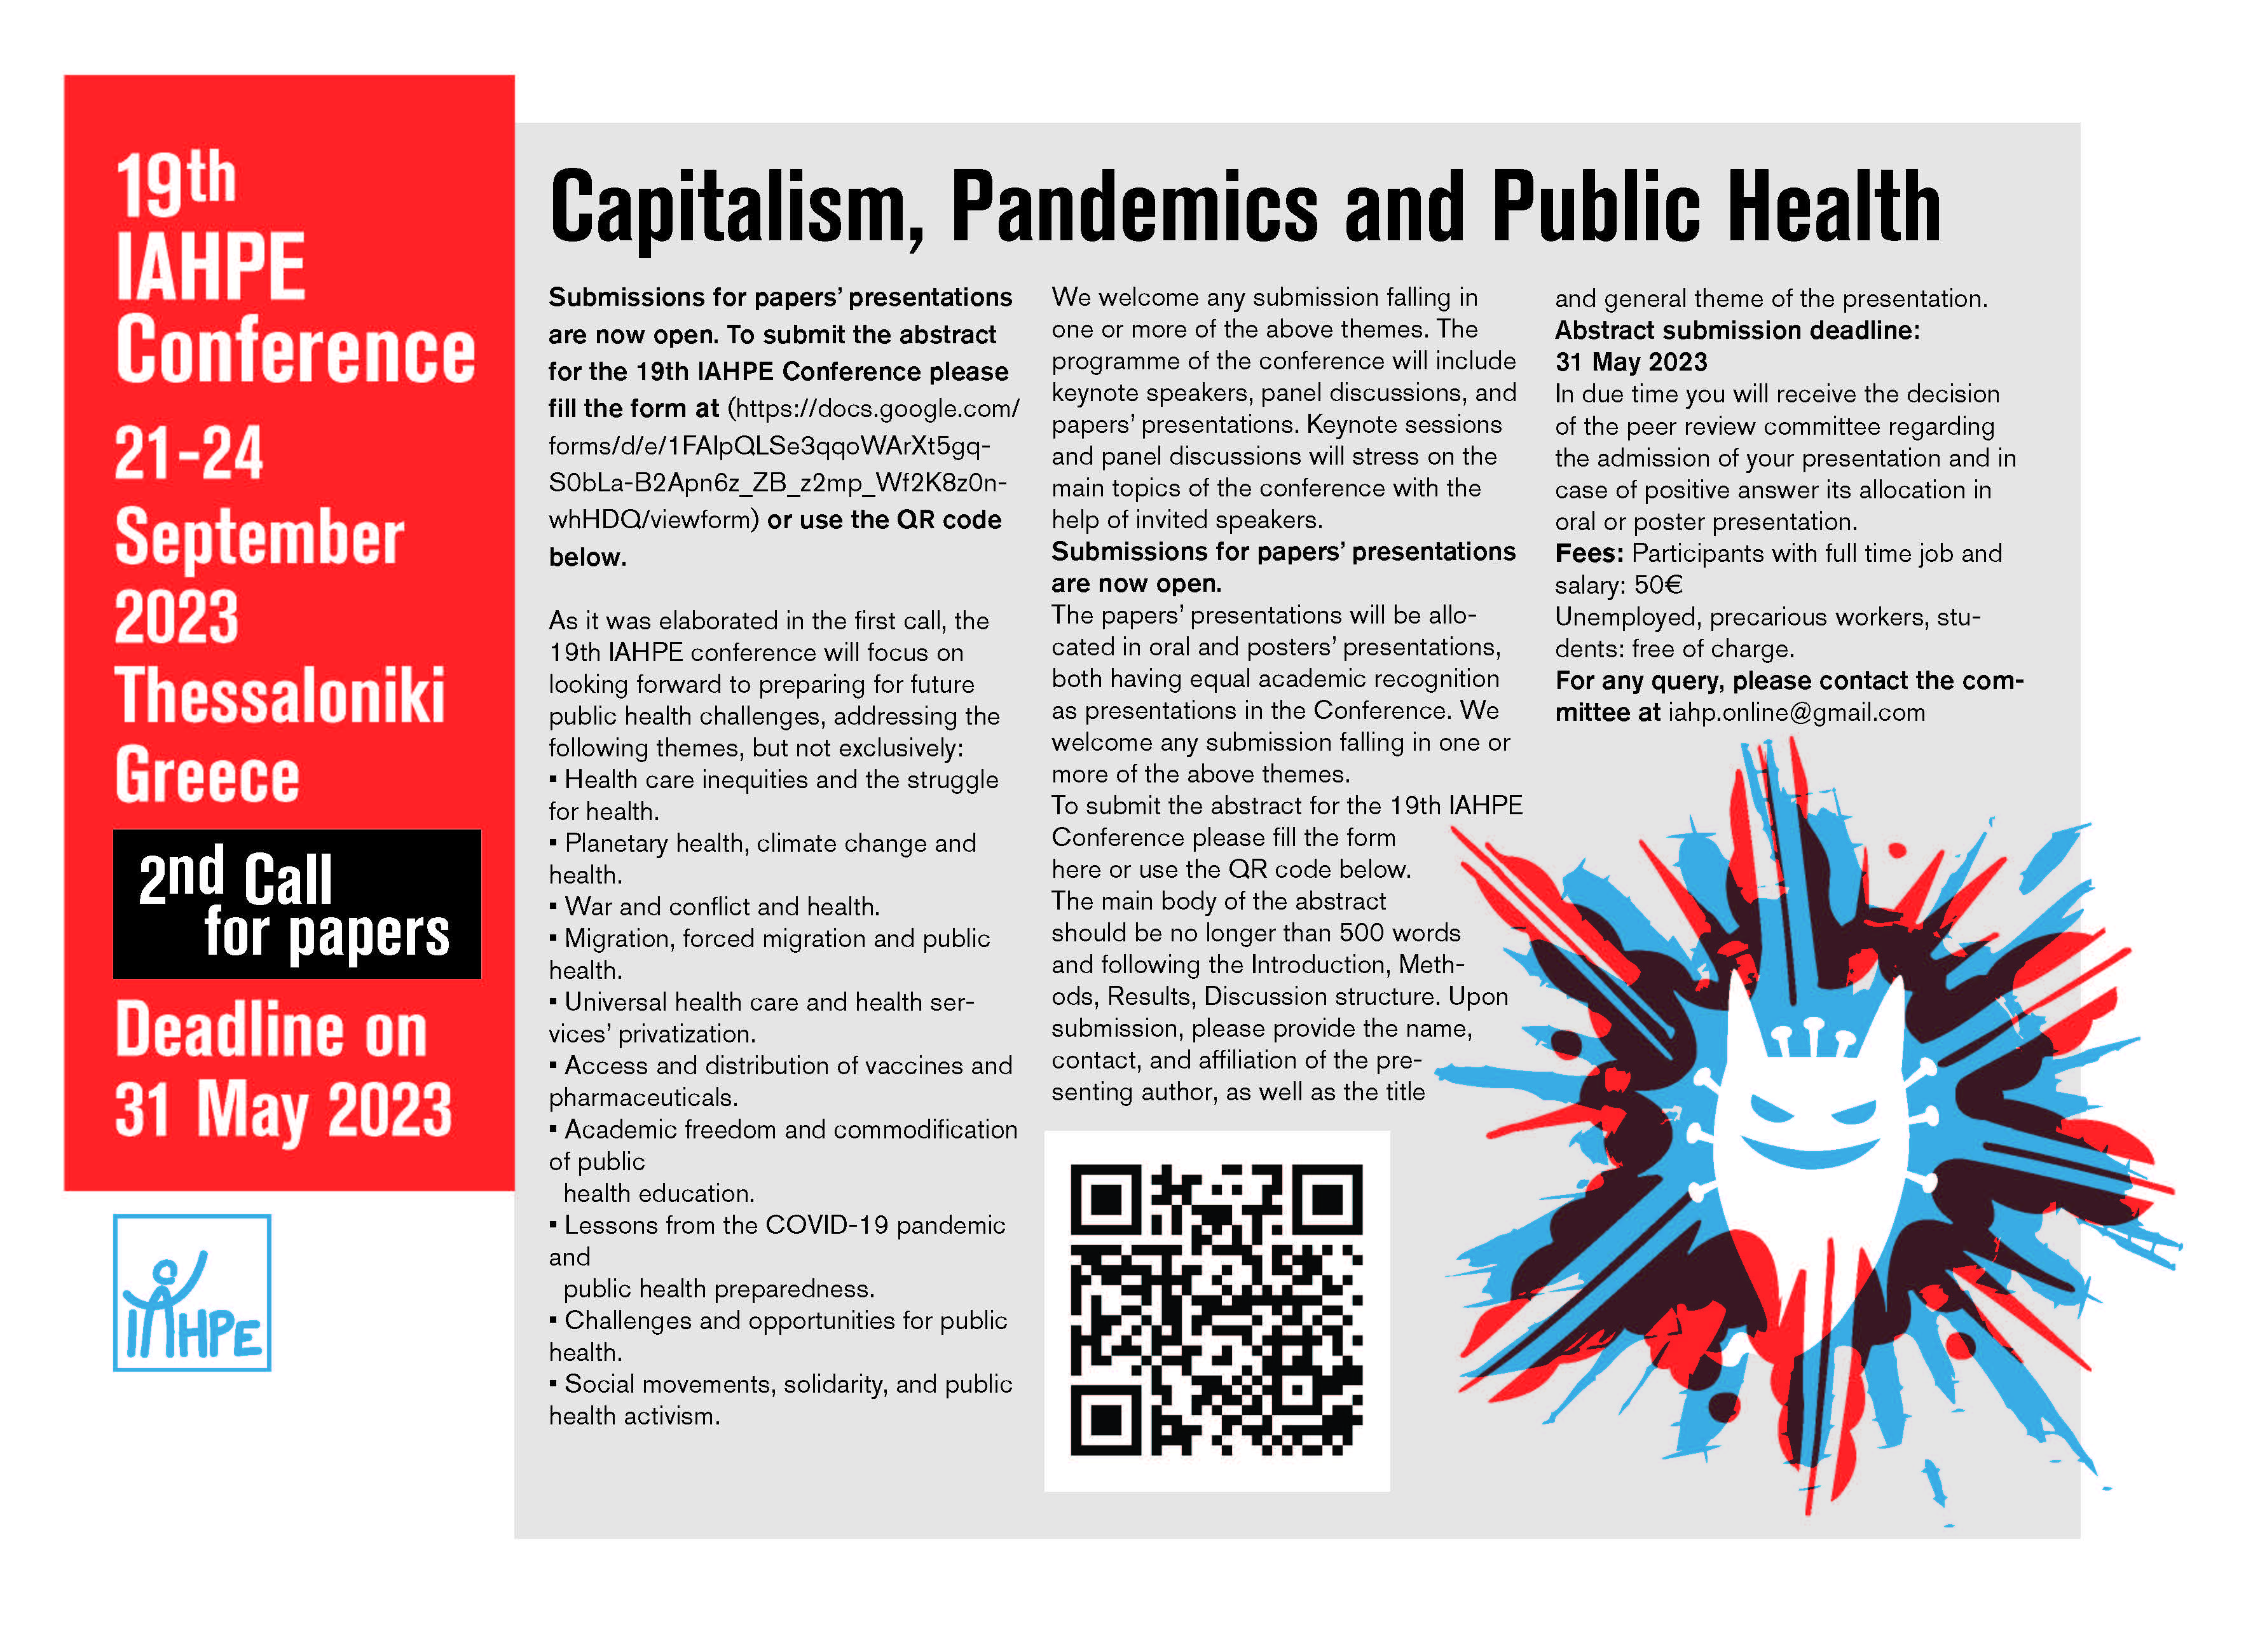 IAHPE Conference, Thessaloniki 21-24 September 2023, second call